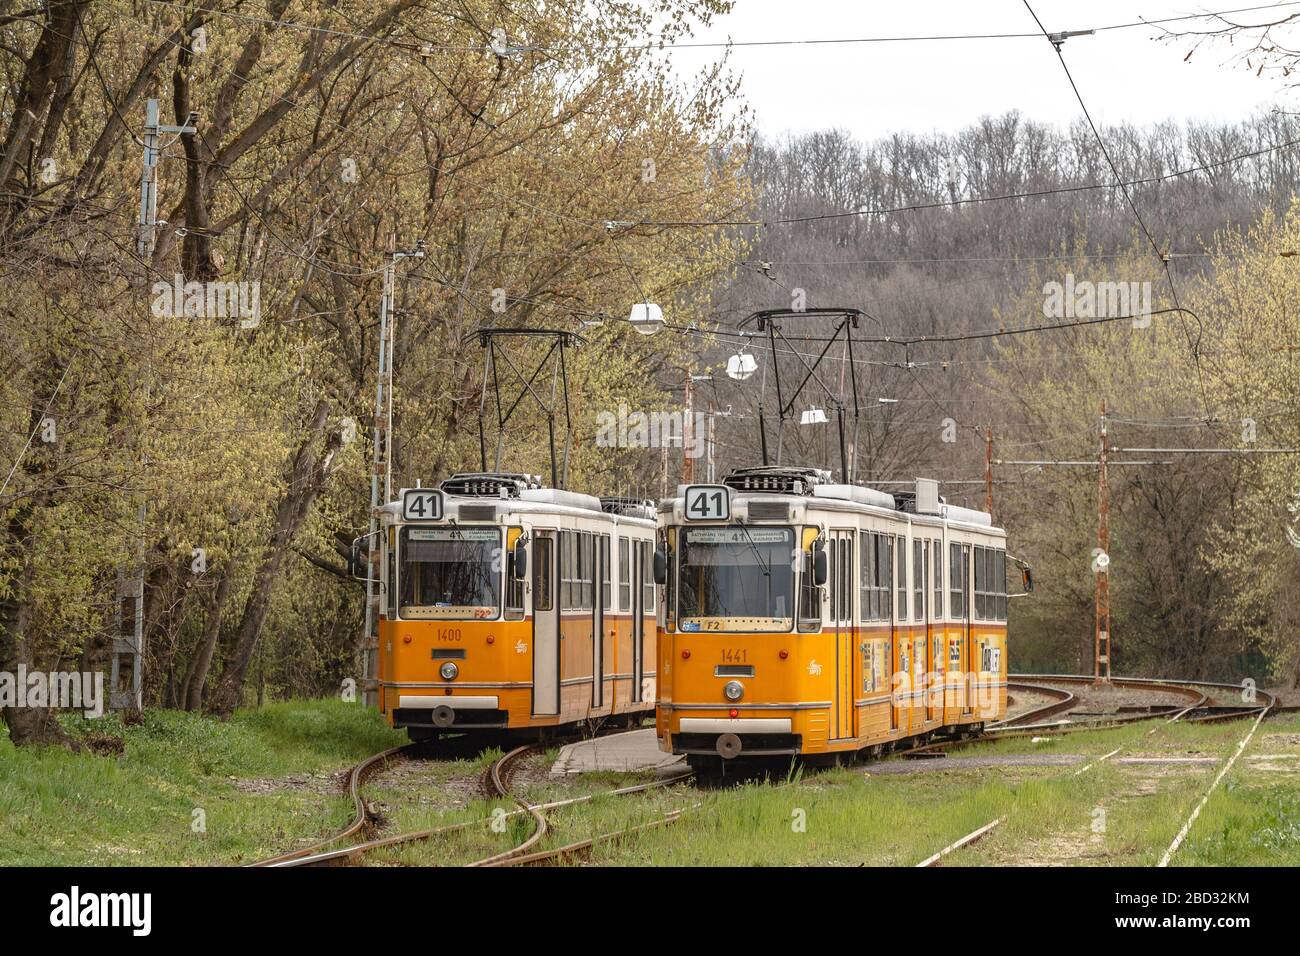 Two Ganz CSMG trams at the Albertfalva terminus of Line 41 in Budapest Stock Photo